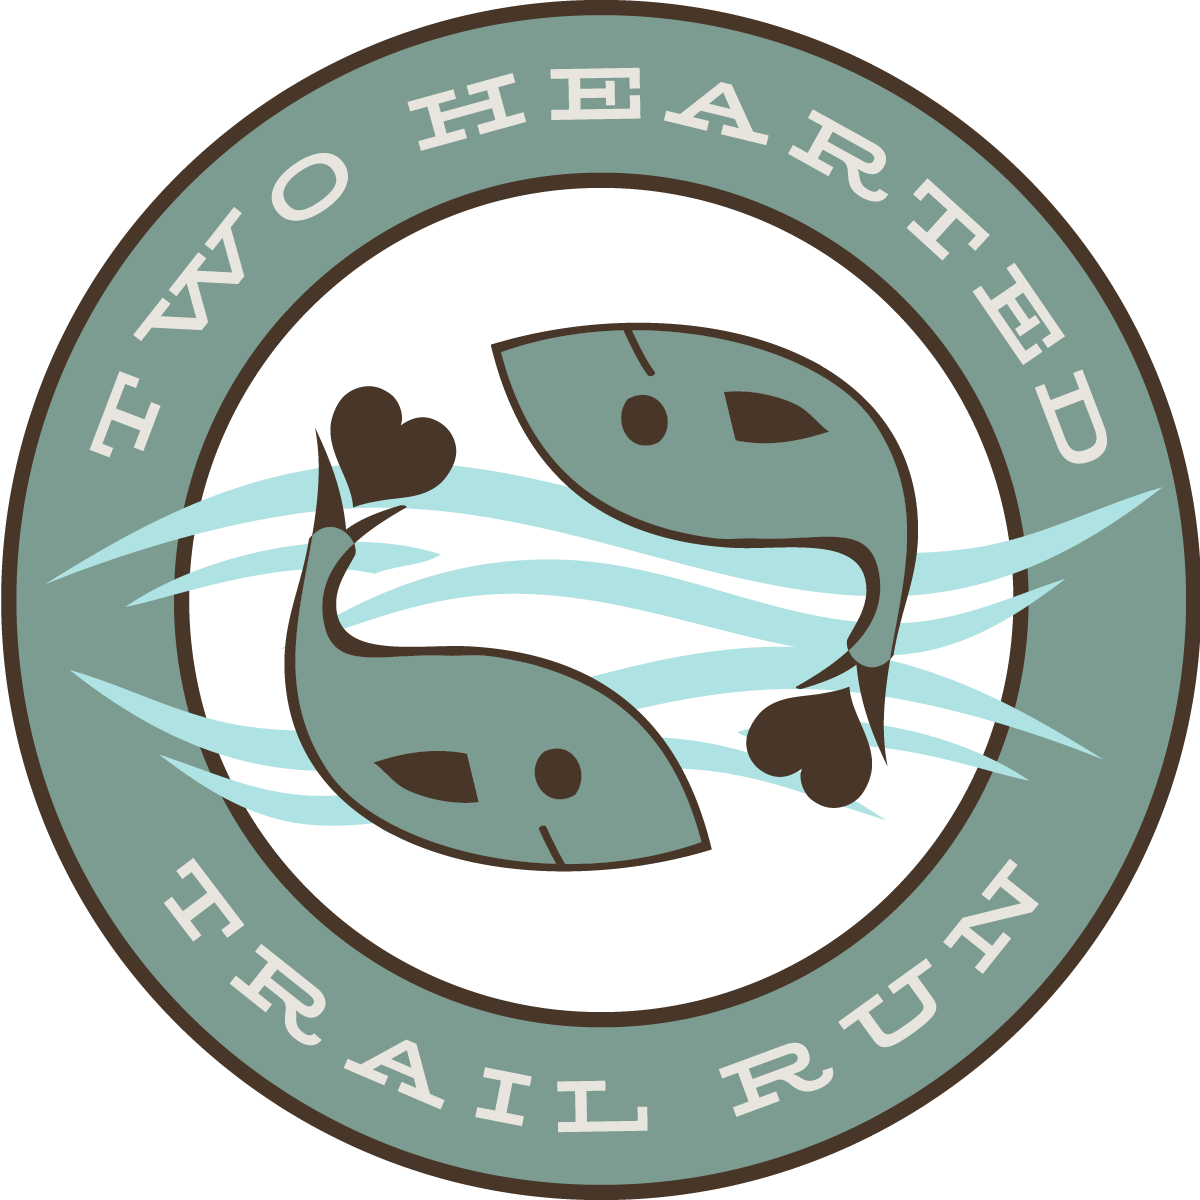 Two Hearted Trail Run logo on RaceRaves